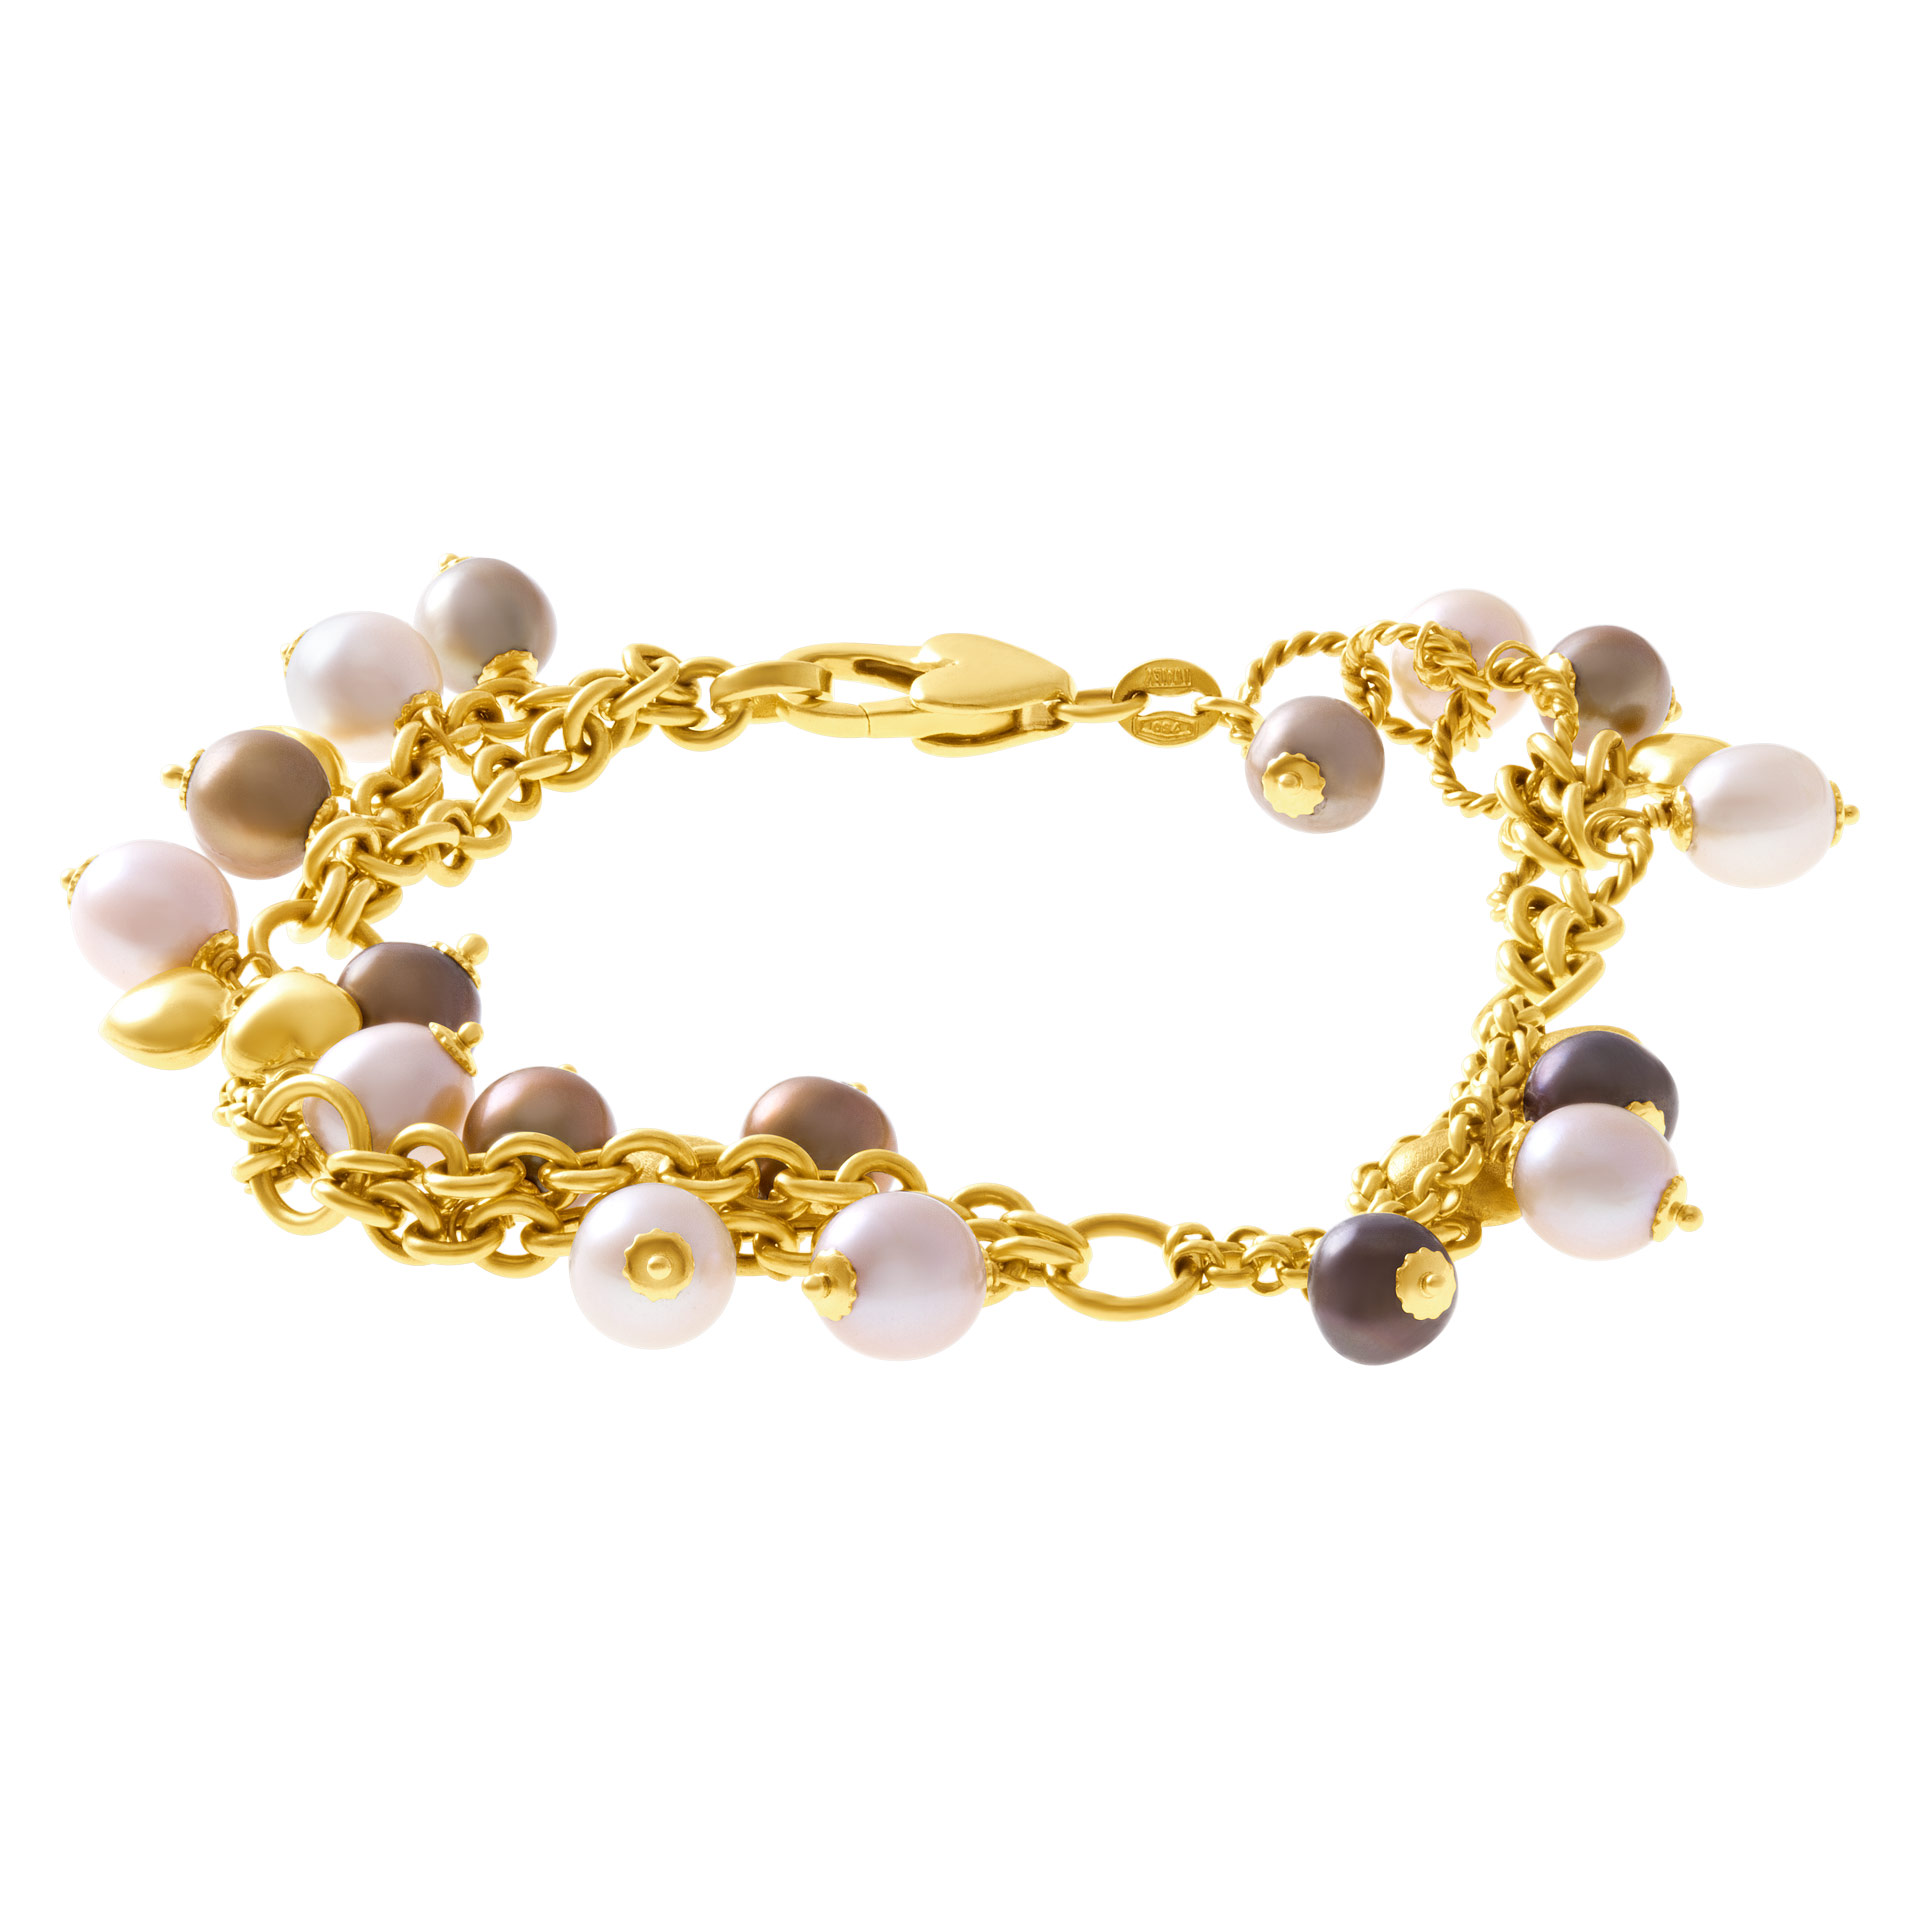 Dangling golden, grey, white fresh water pearls & gold heart charms bracelet in 18k yellow gold image 1